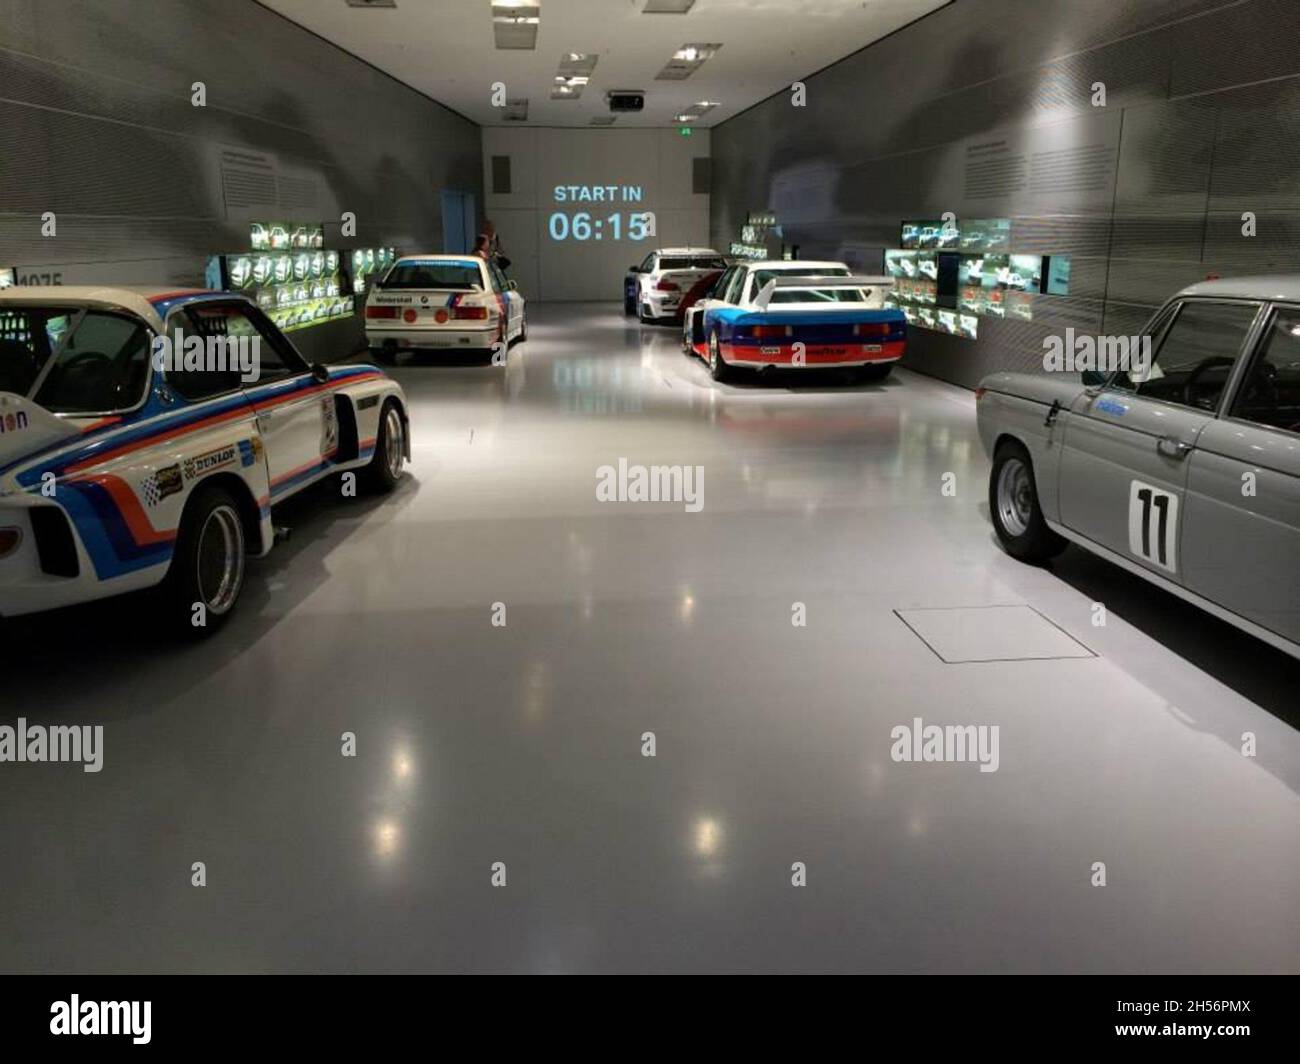 Racing Cars Gallery. - BMW Museum - Munich - Germany - September 2013. Stock Photo